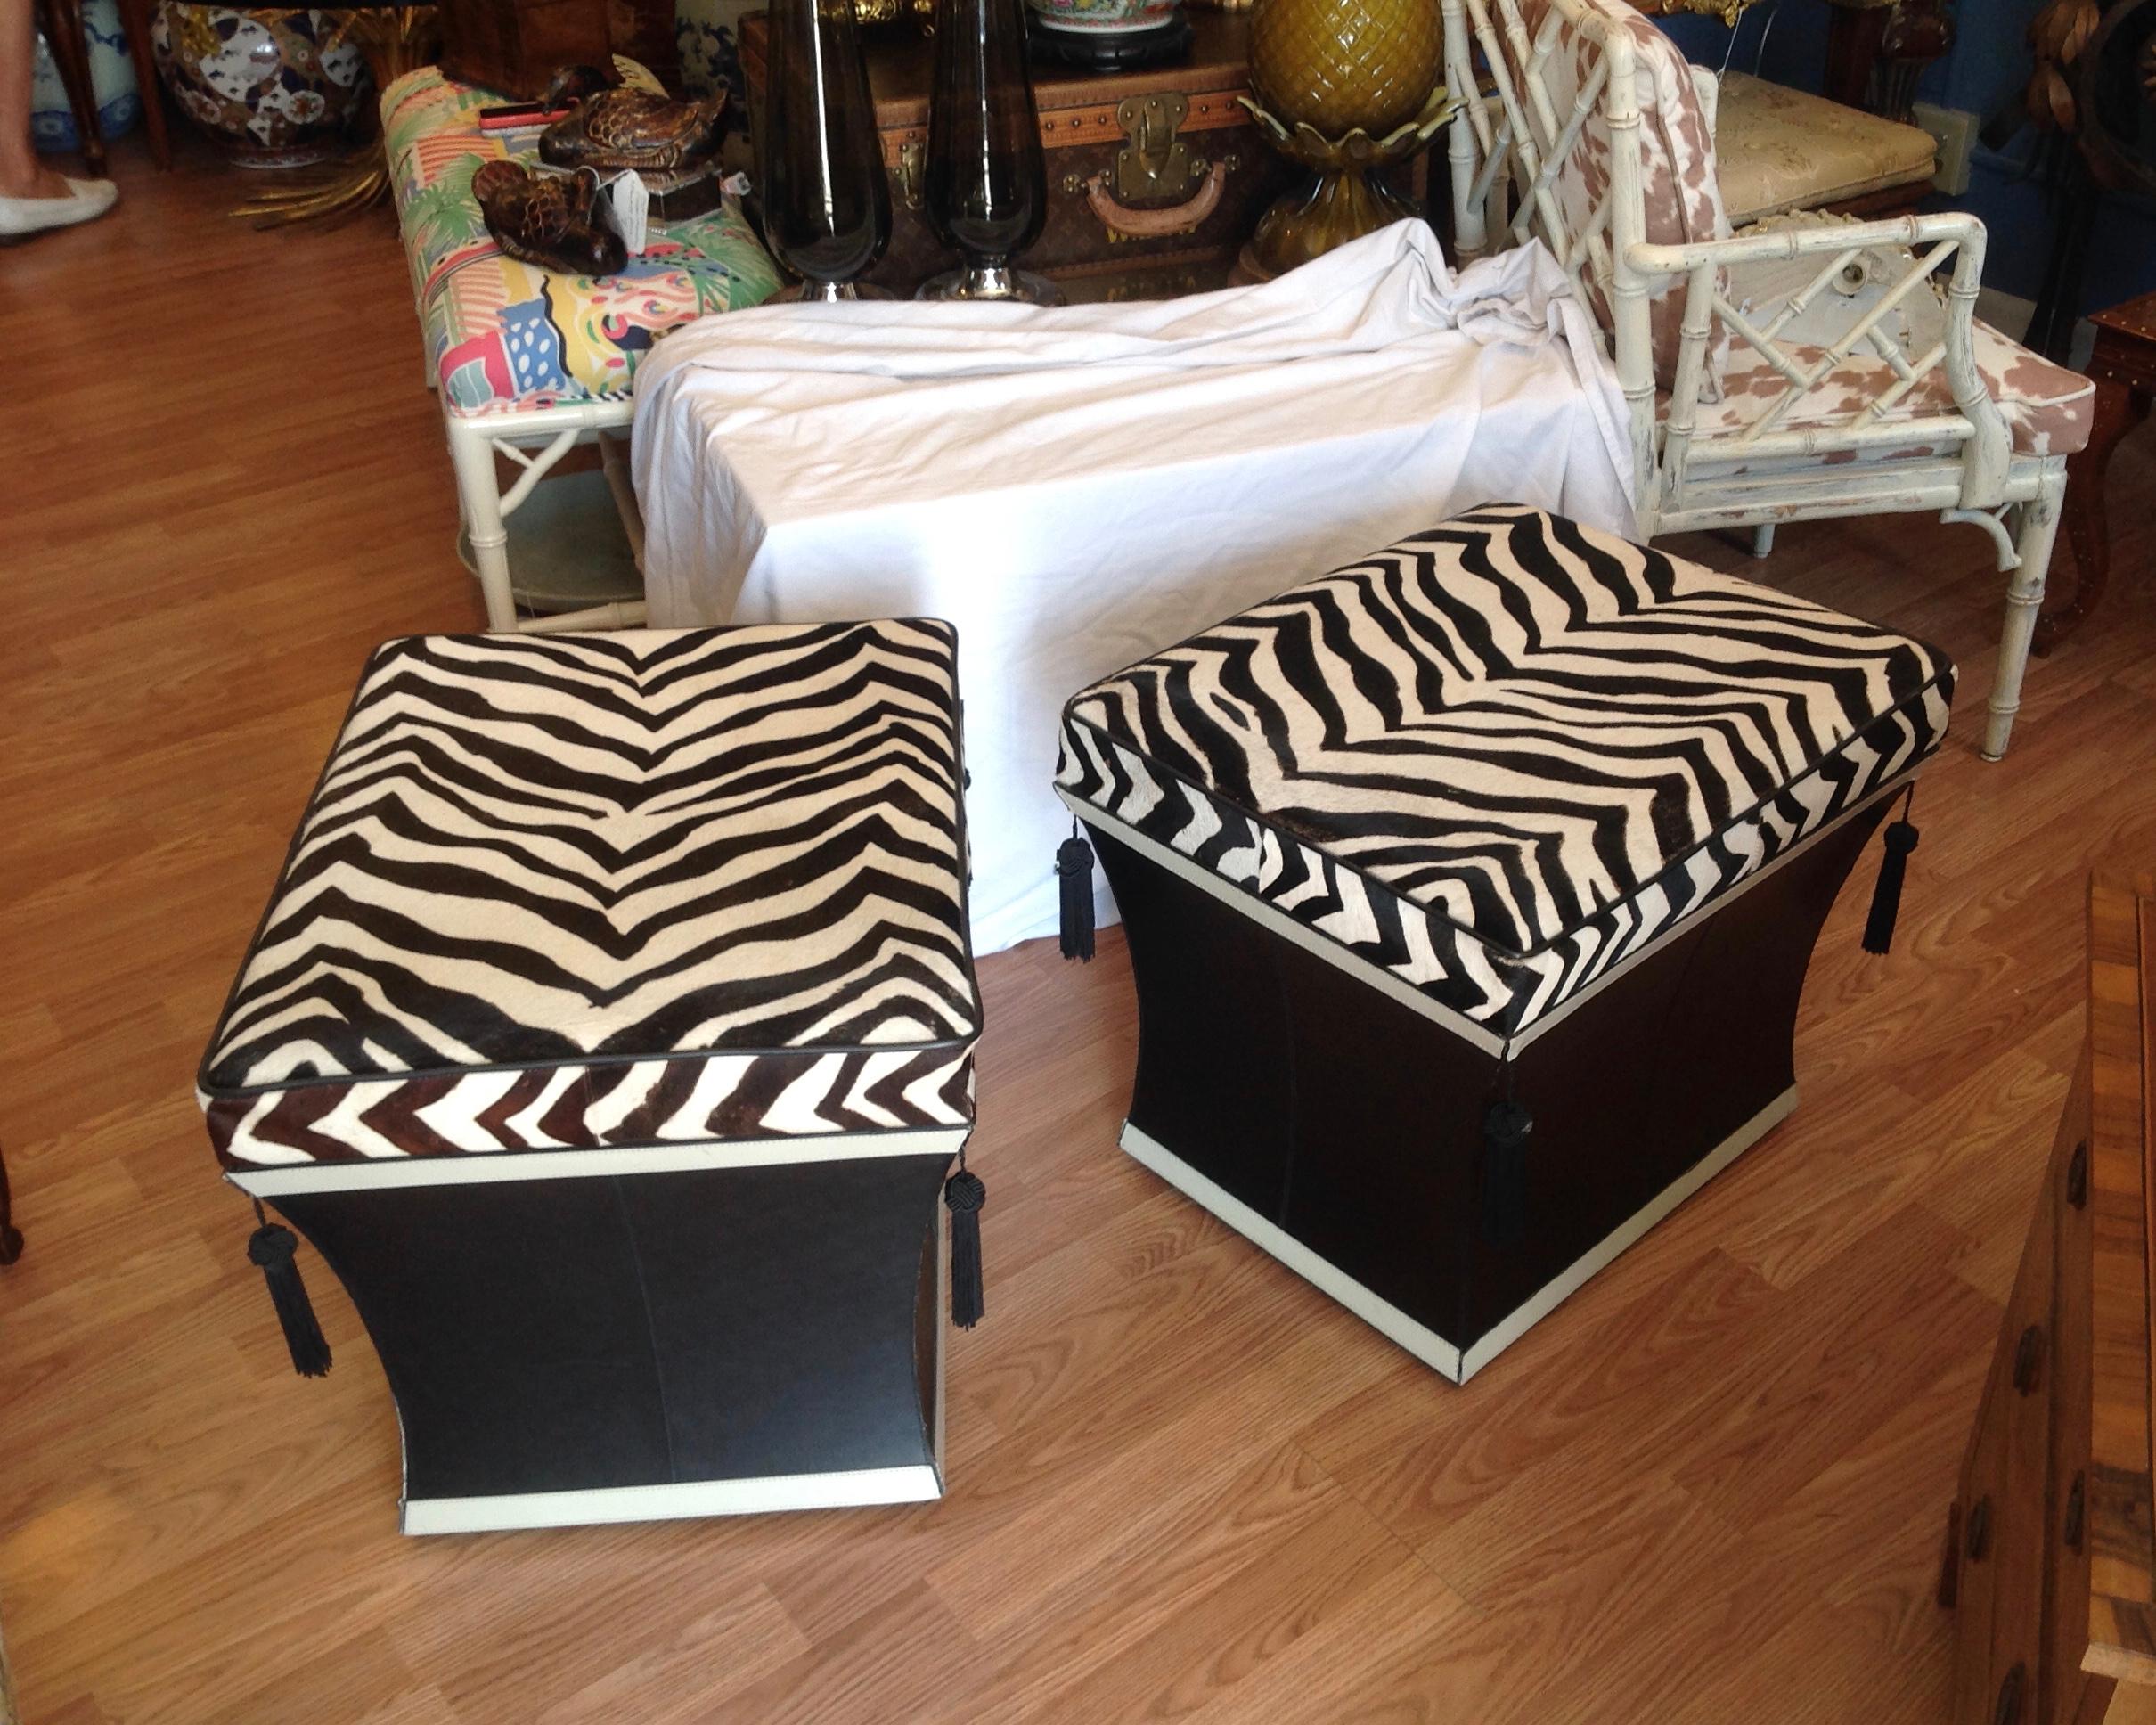 An eye catching pair of hide and leather ottomans, appointed with tassels,
and fashioned with hinged tops to provide storage inside - great form and function.